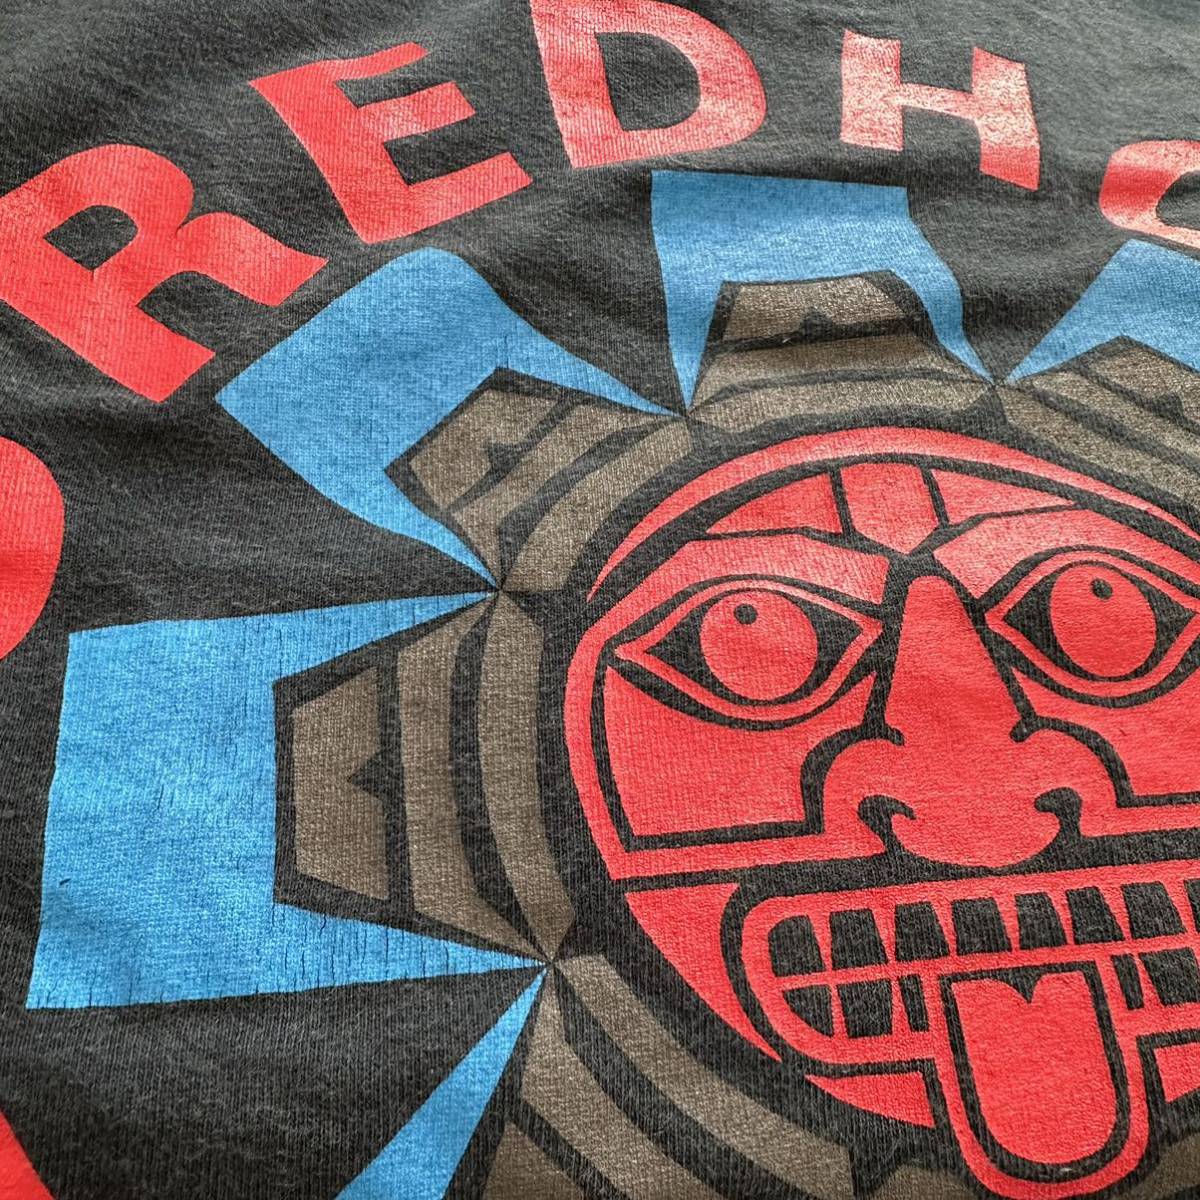 90's Red Hot Chili Peppers Music Tshirt ヴィンテージ _画像2